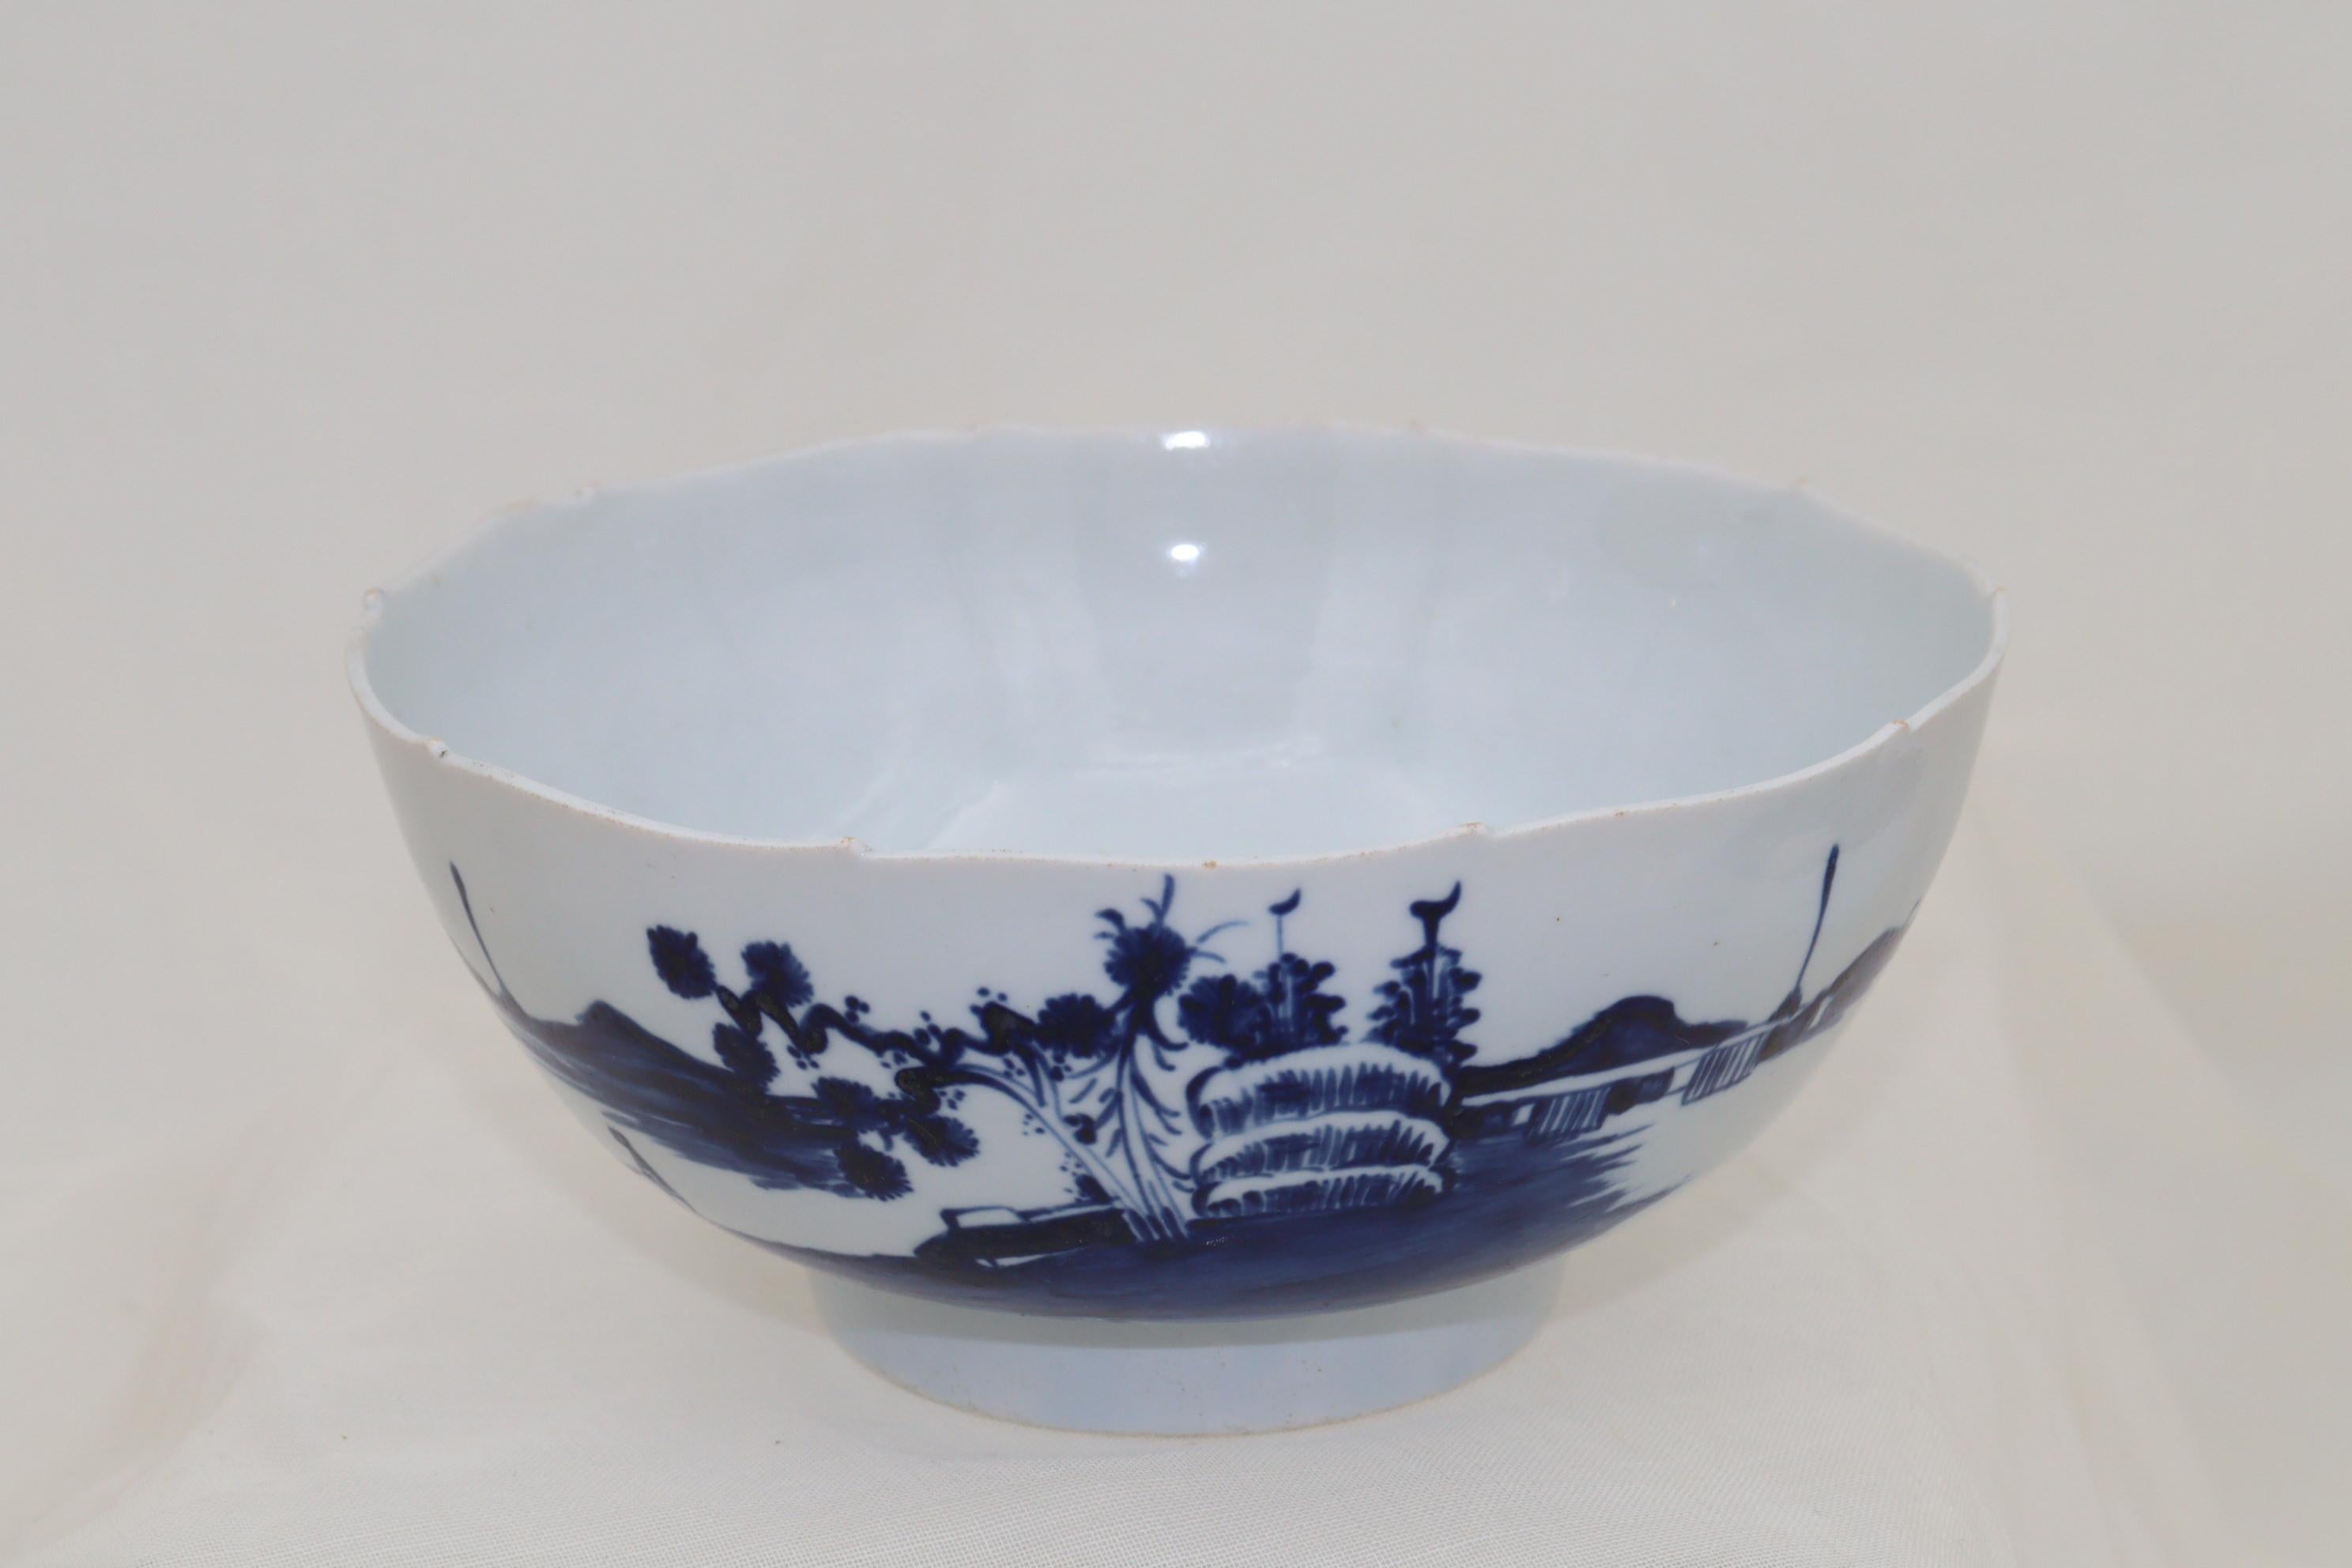 This porcelain bowl is by Richard Chaffers of Liverpool and is decorated with the hand painted blue and white 